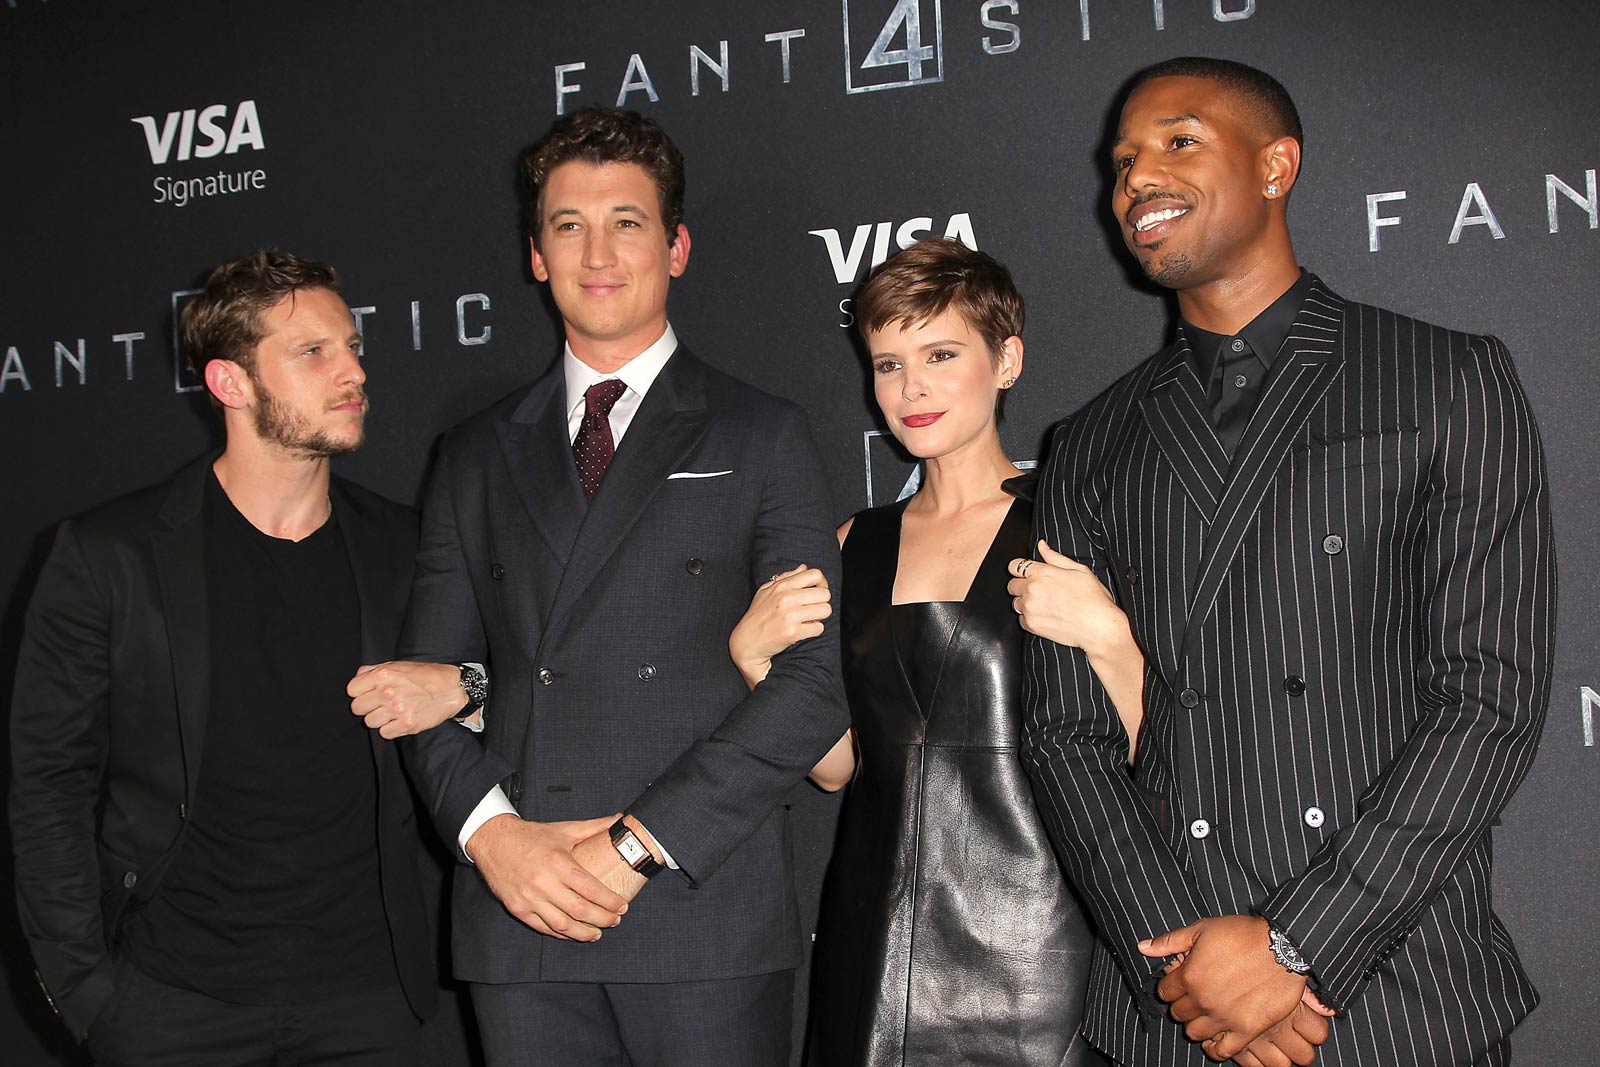 Kate Mara attends Fantastic Four premiere in NYC